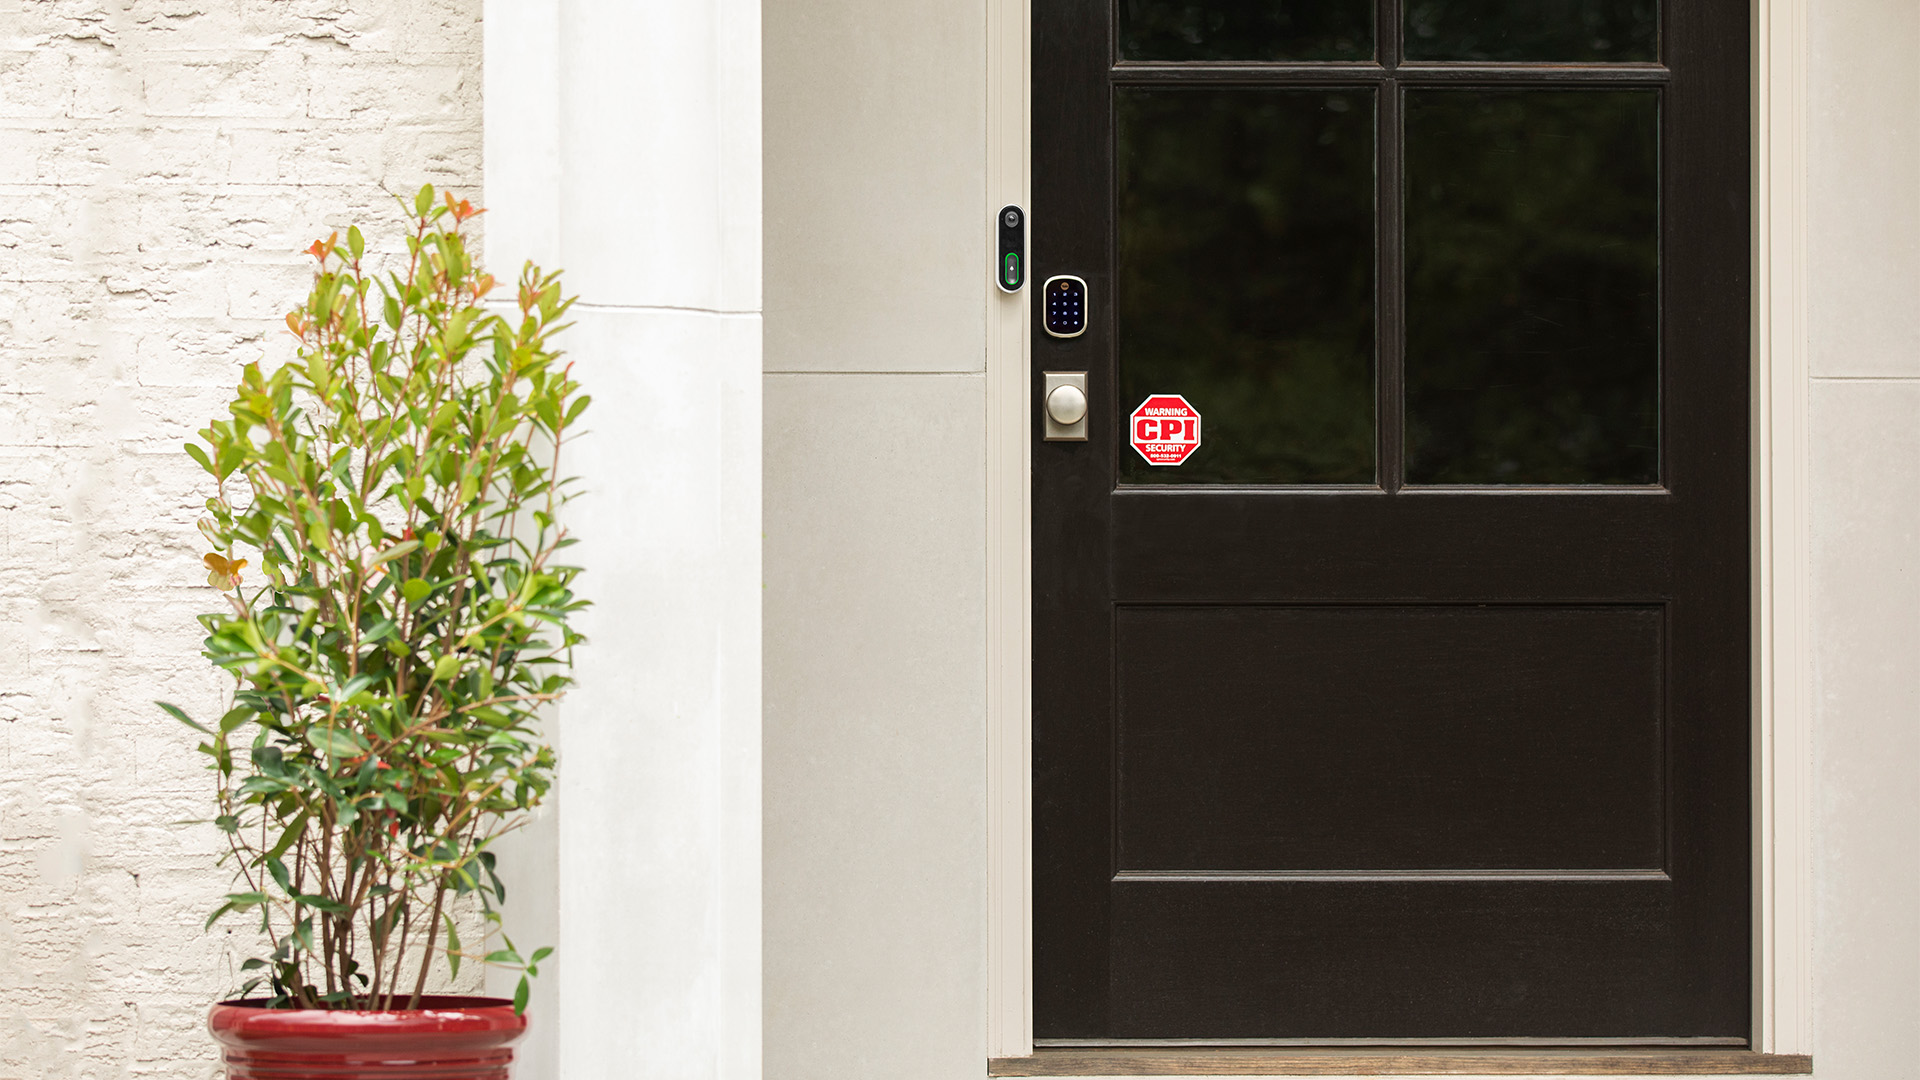 Home Security System | CPI Security Blog